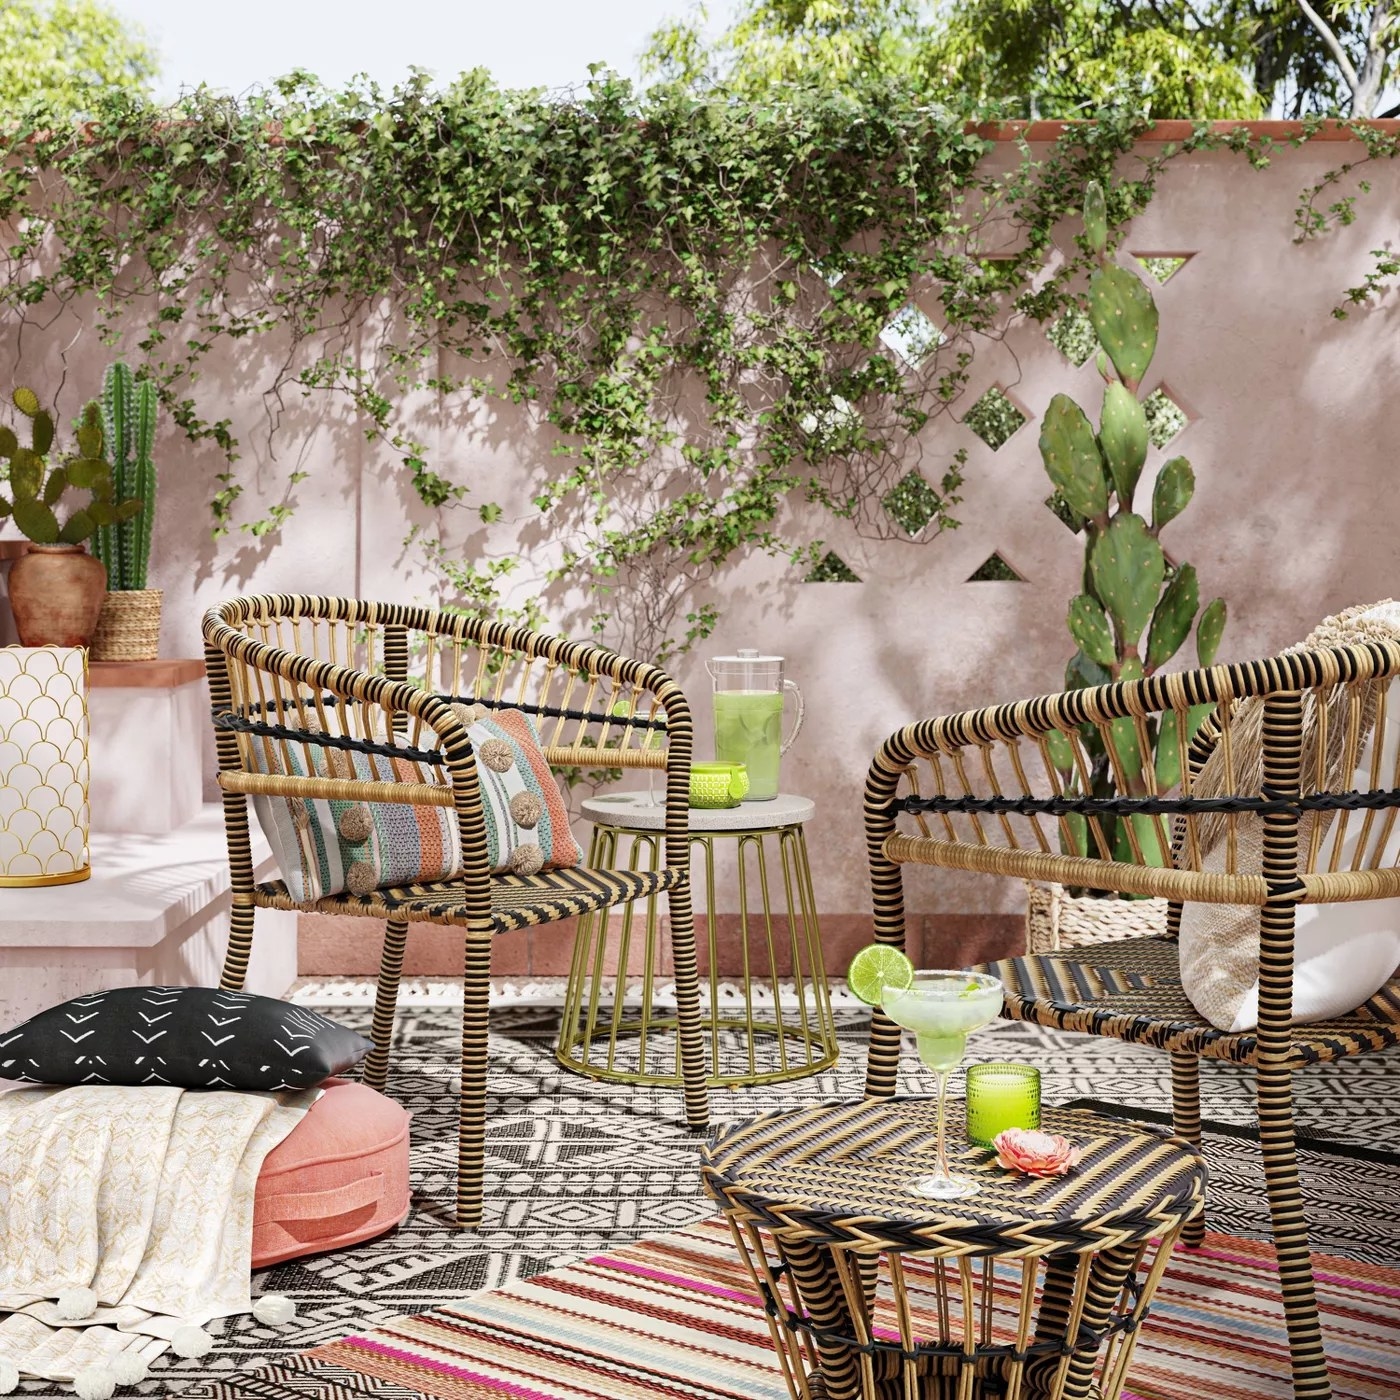 The black and beige patio set in a backyard